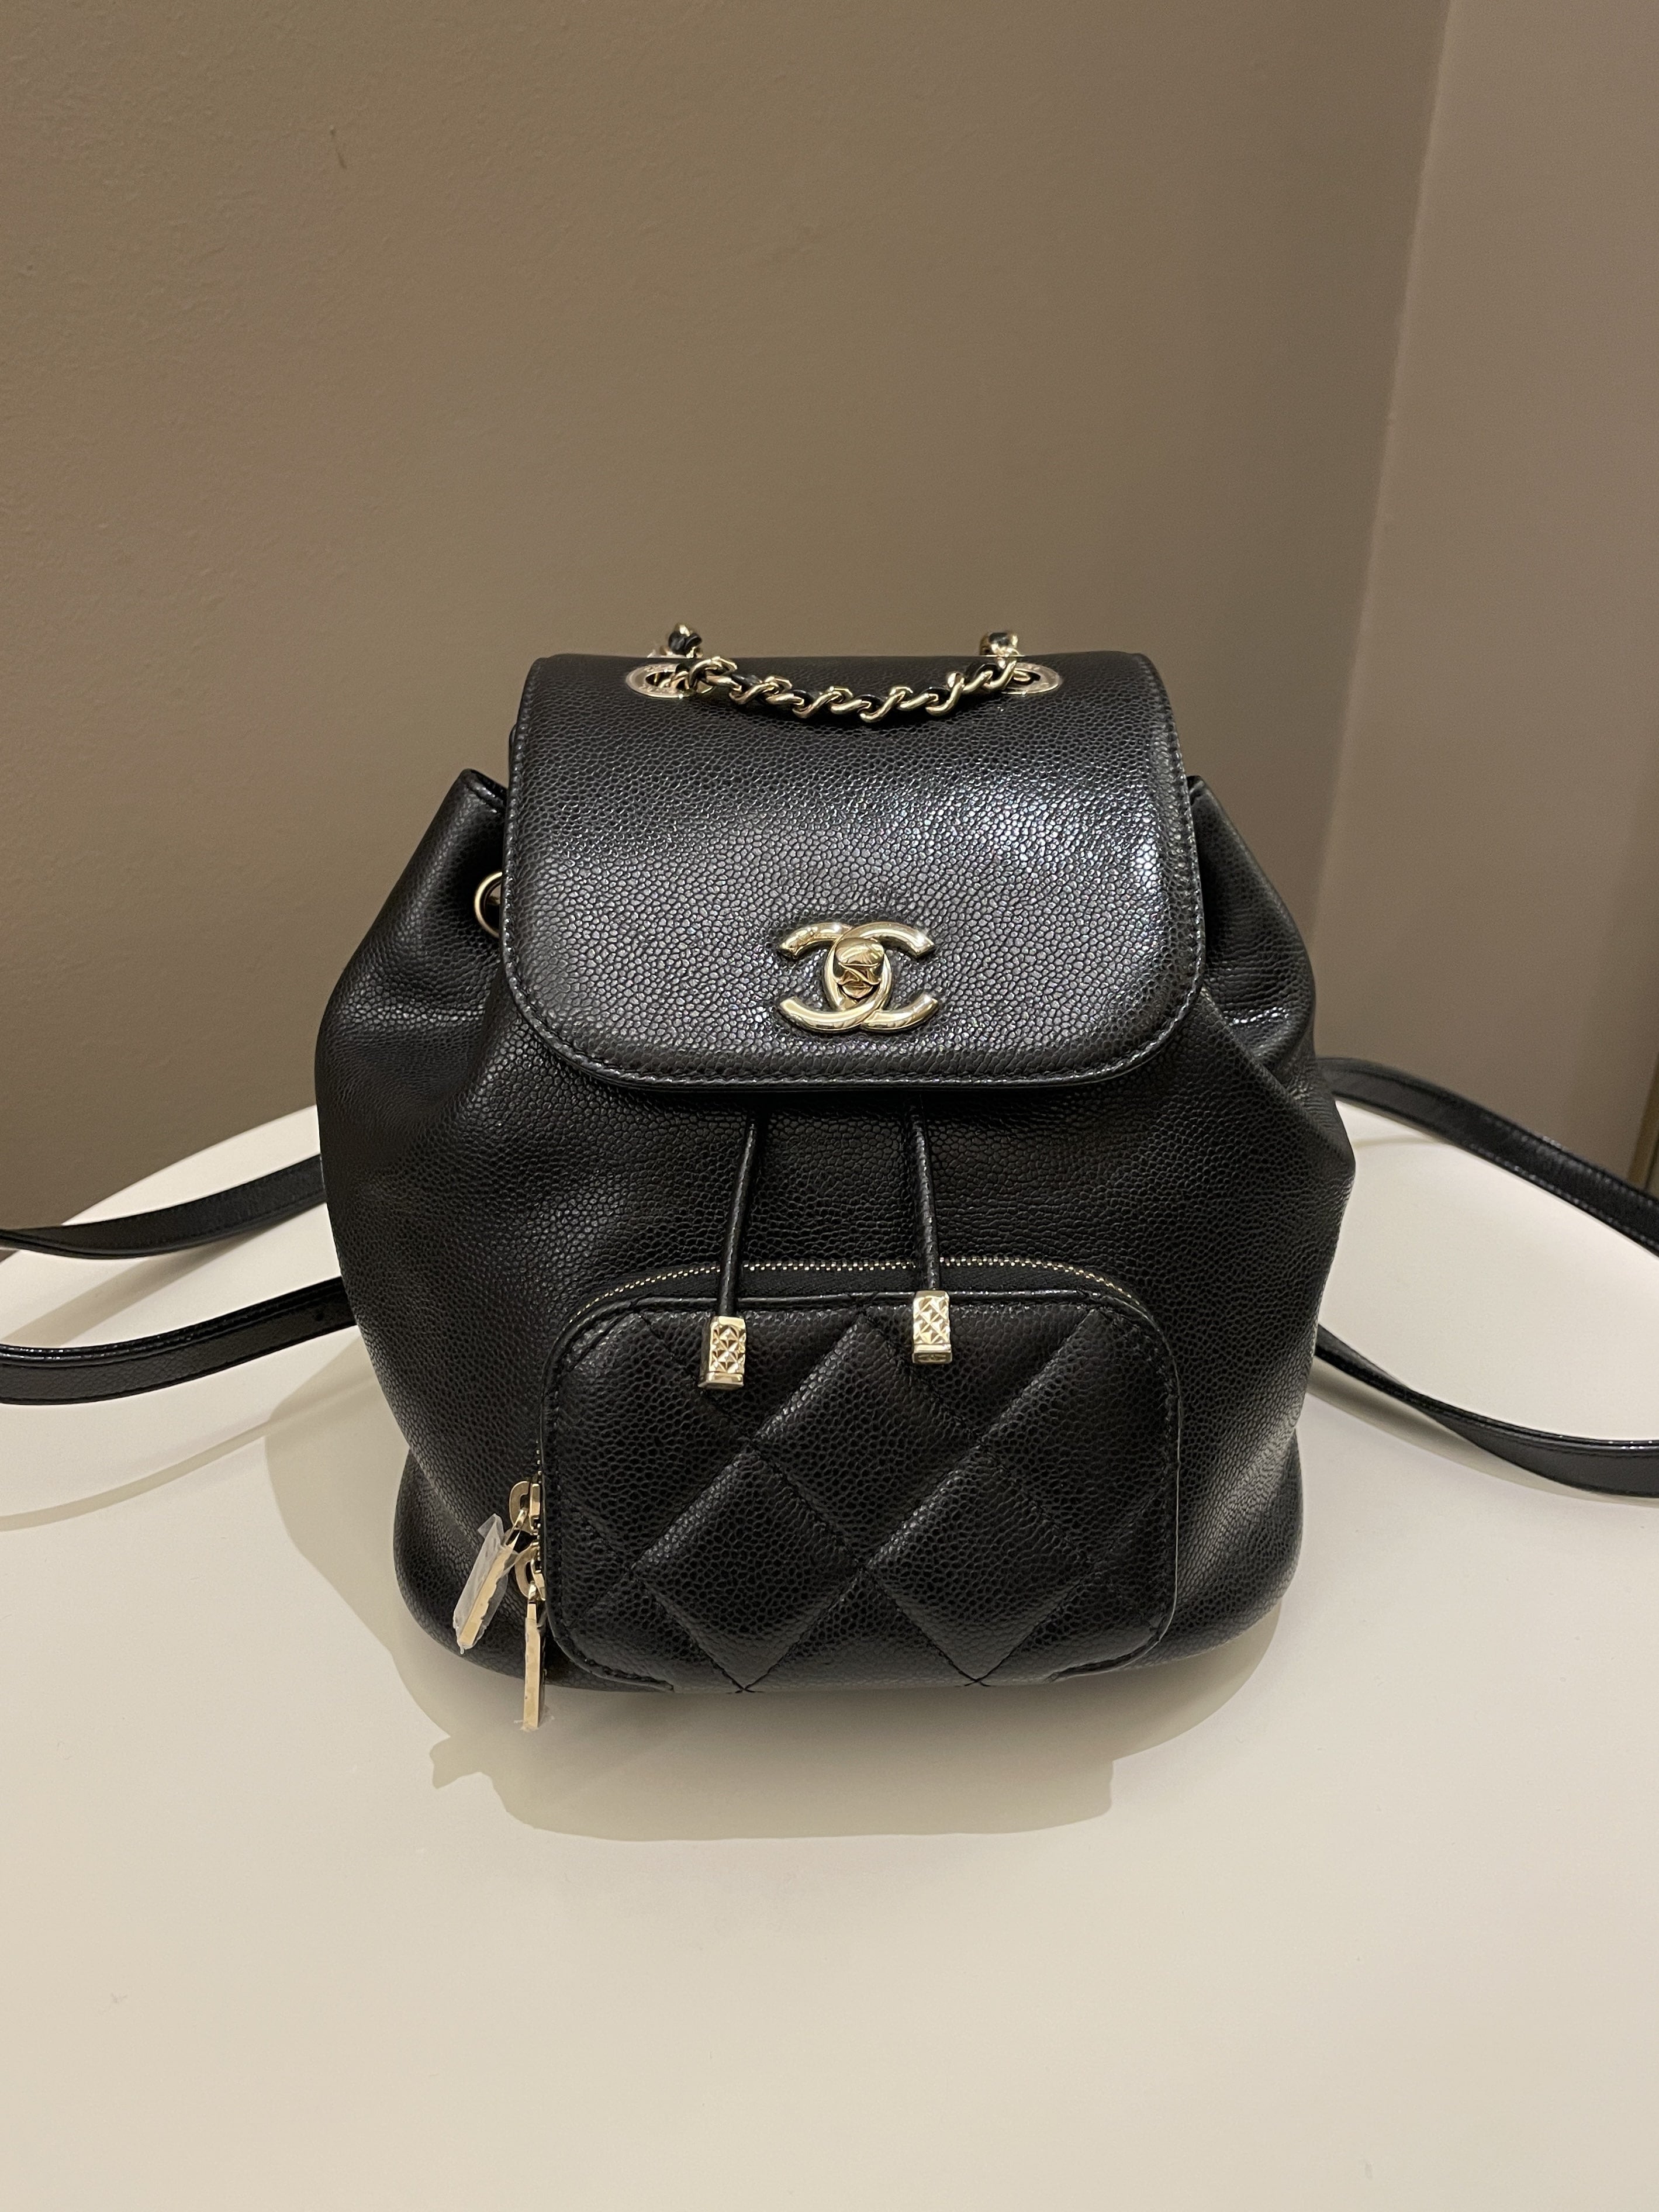 CHANEL BUSINESS AFFINITY BACKPACK: First Impressions, Review & Mod Shots! 